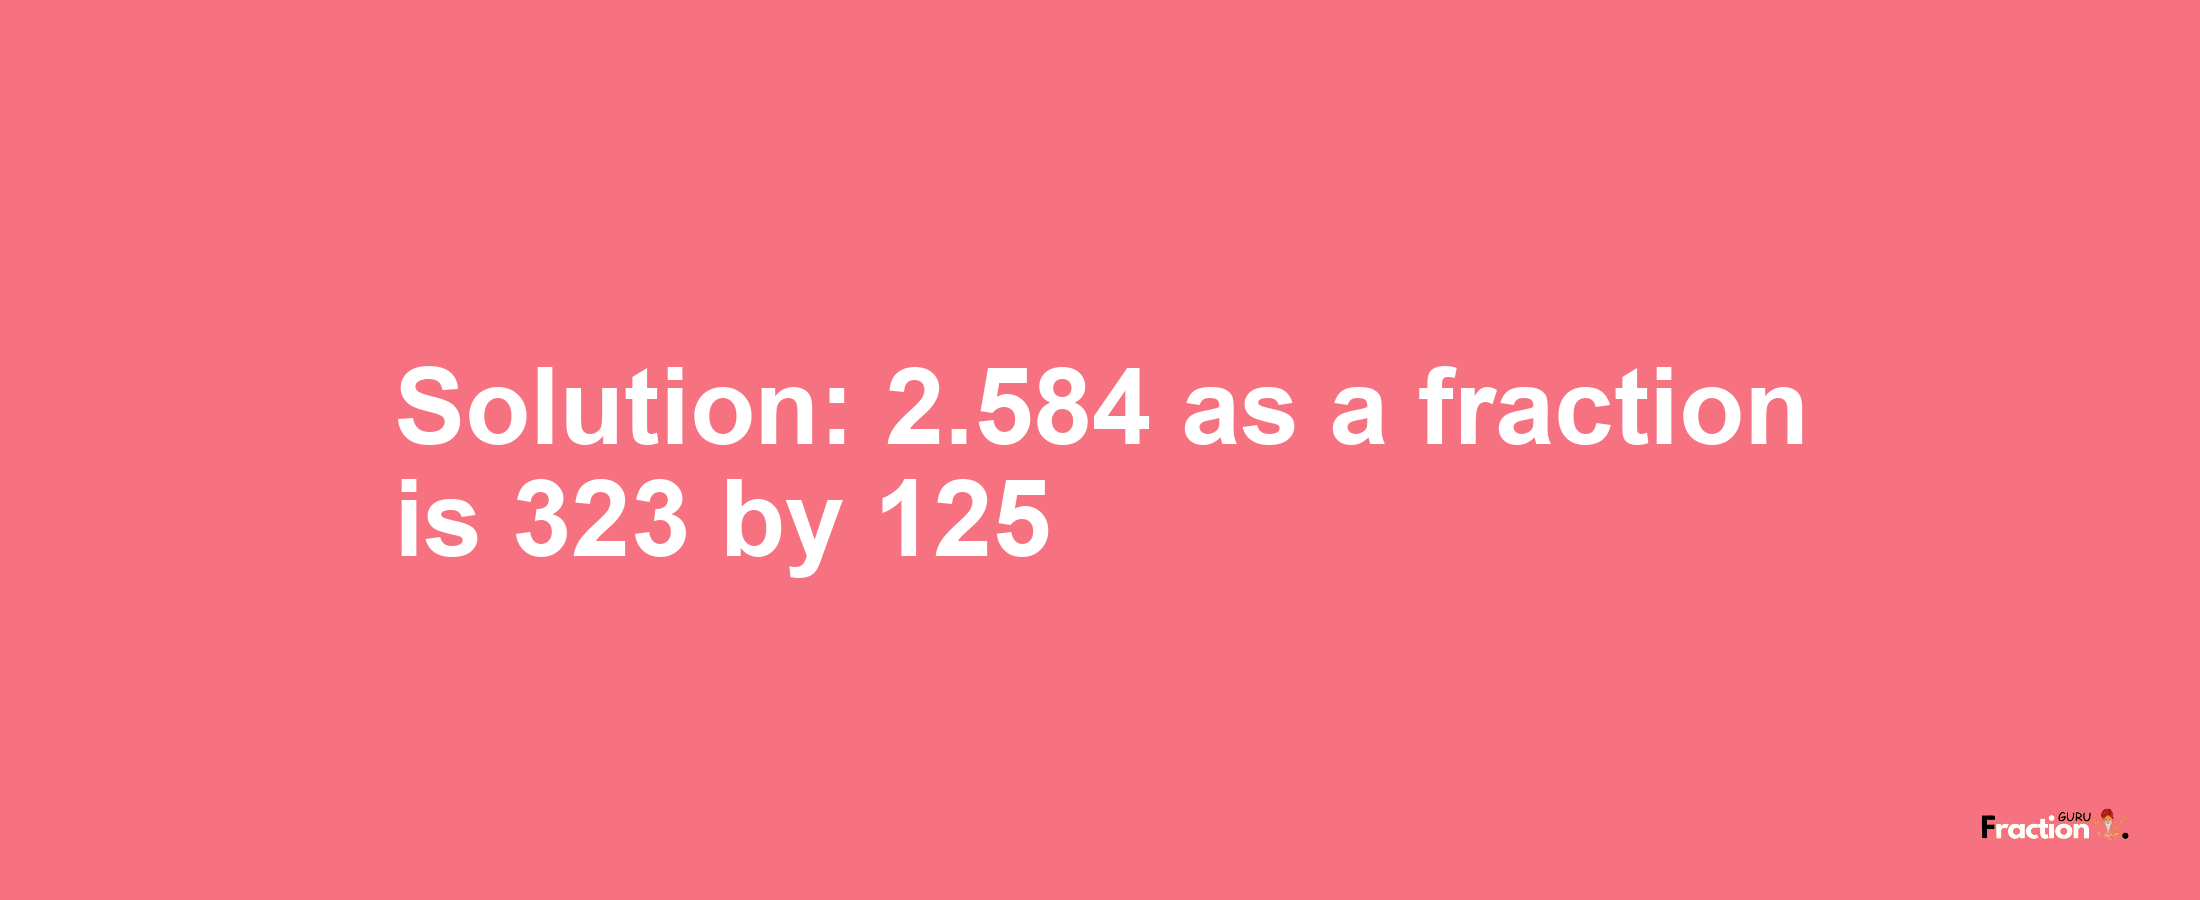 Solution:2.584 as a fraction is 323/125